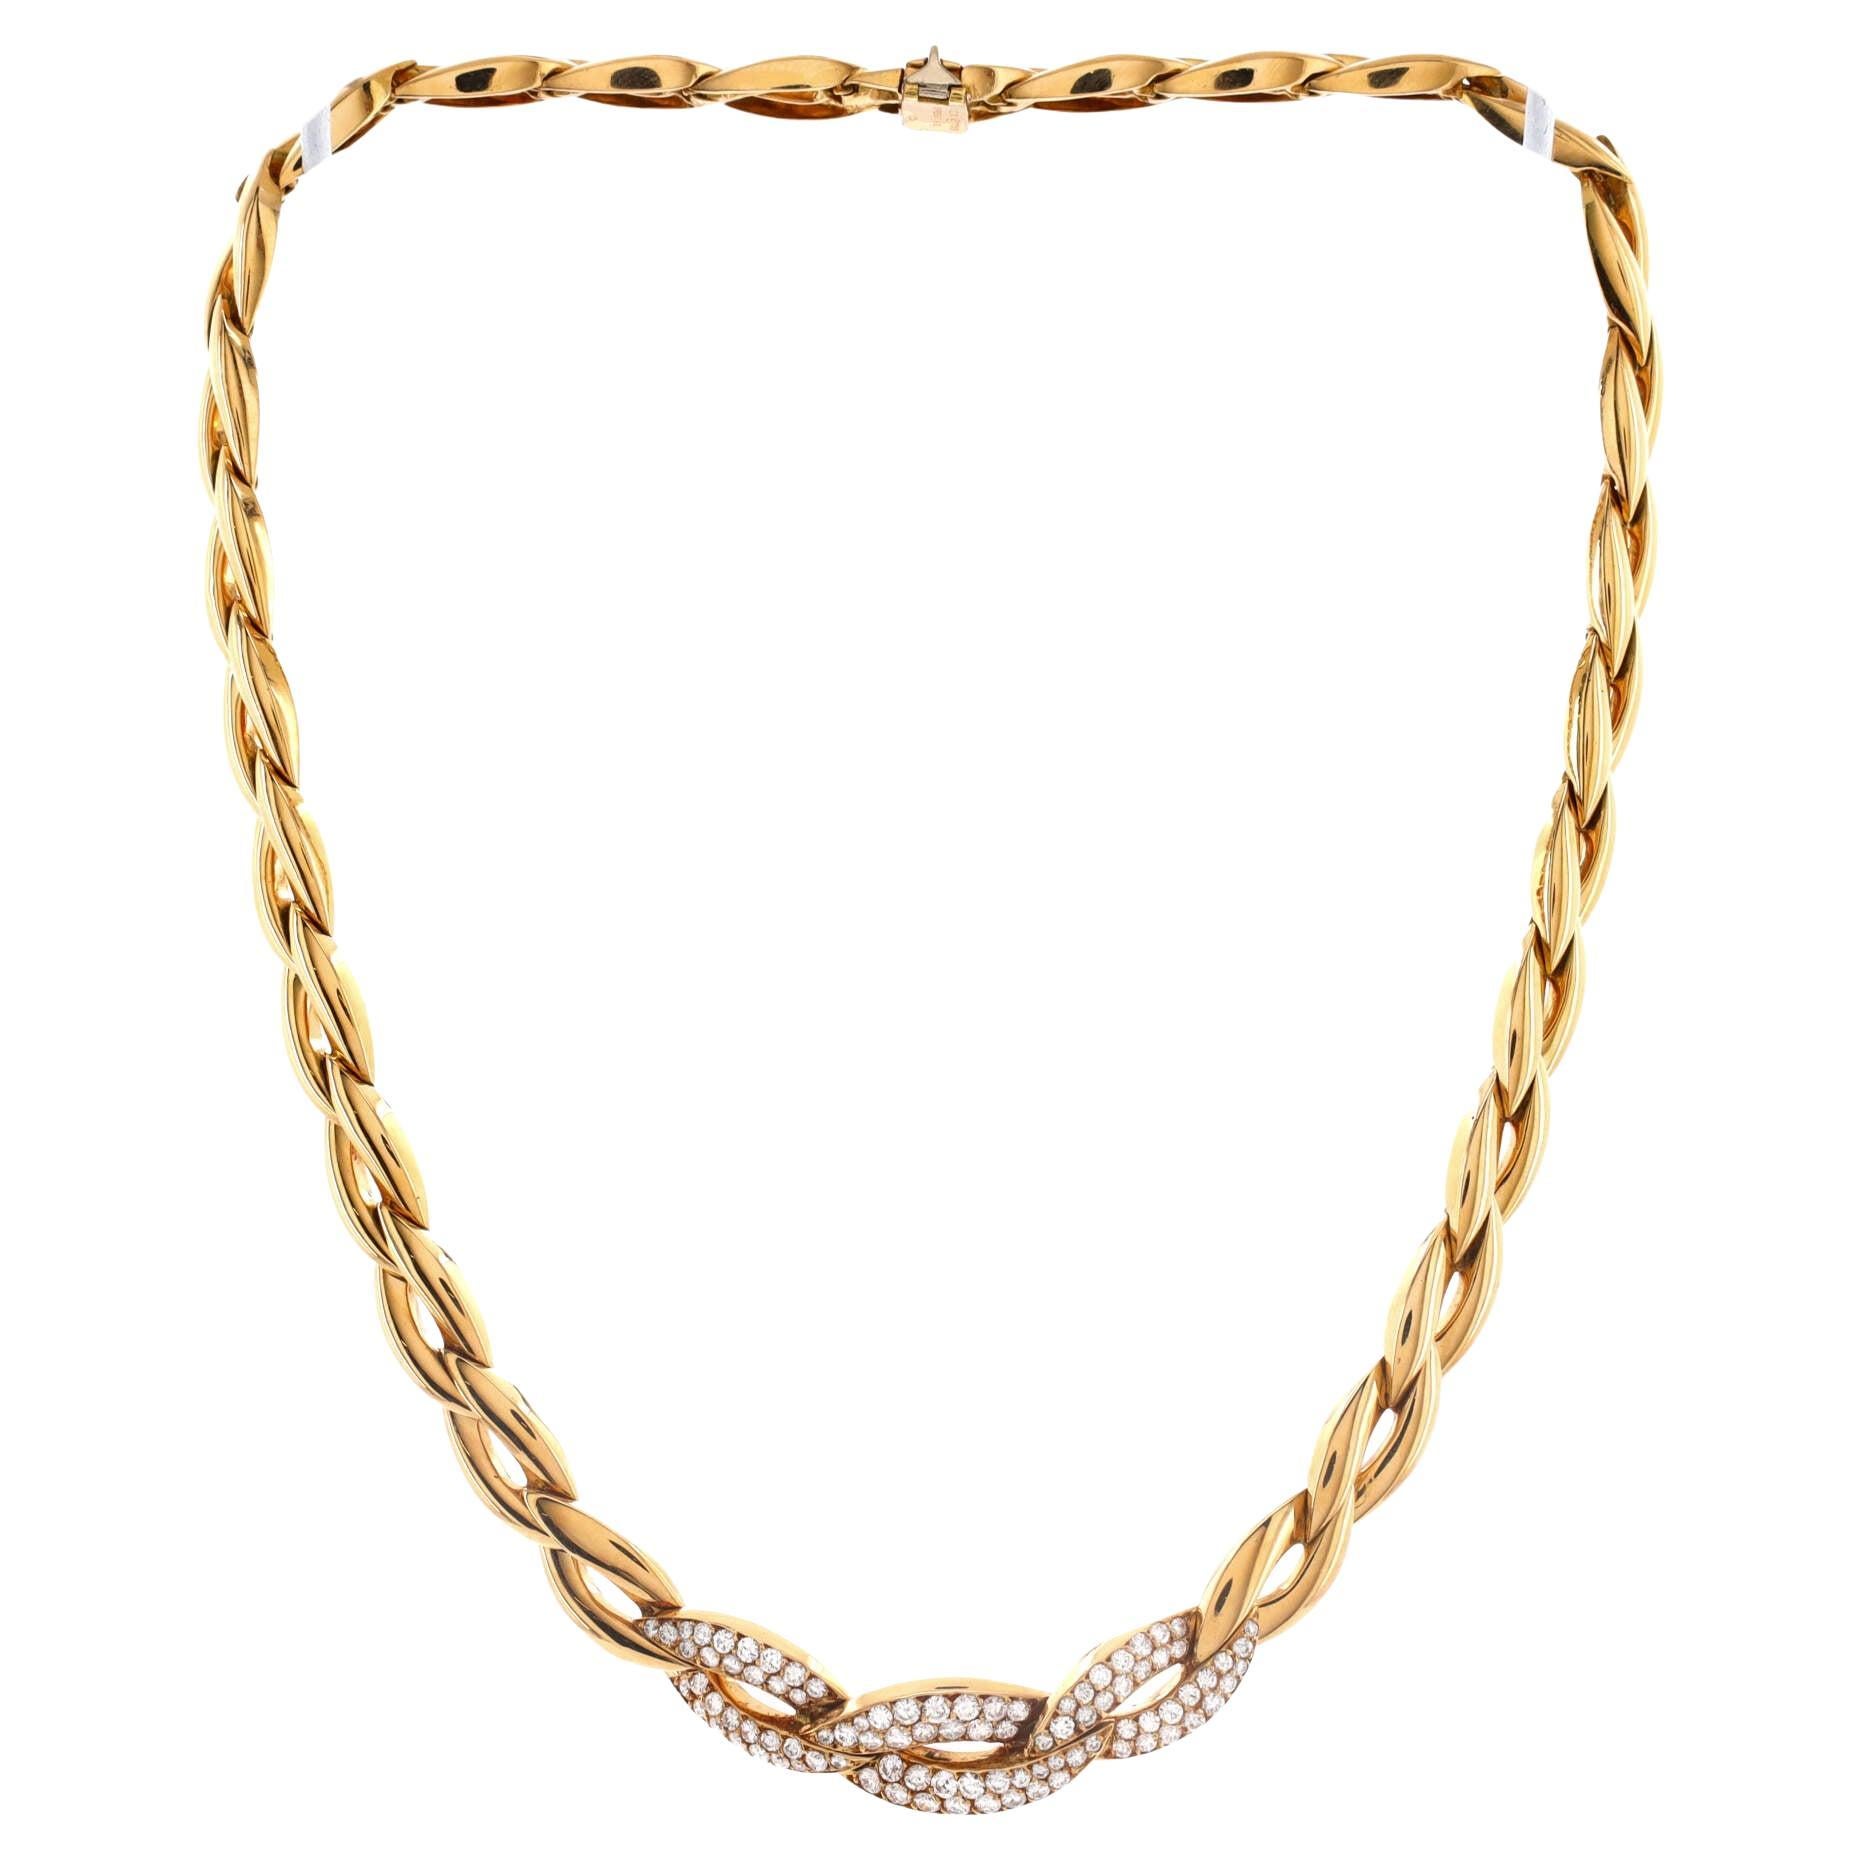 Van Cleef & Arpels Vintage Chain Link Necklace 18k Yellow Gold and Diamonds For Sale